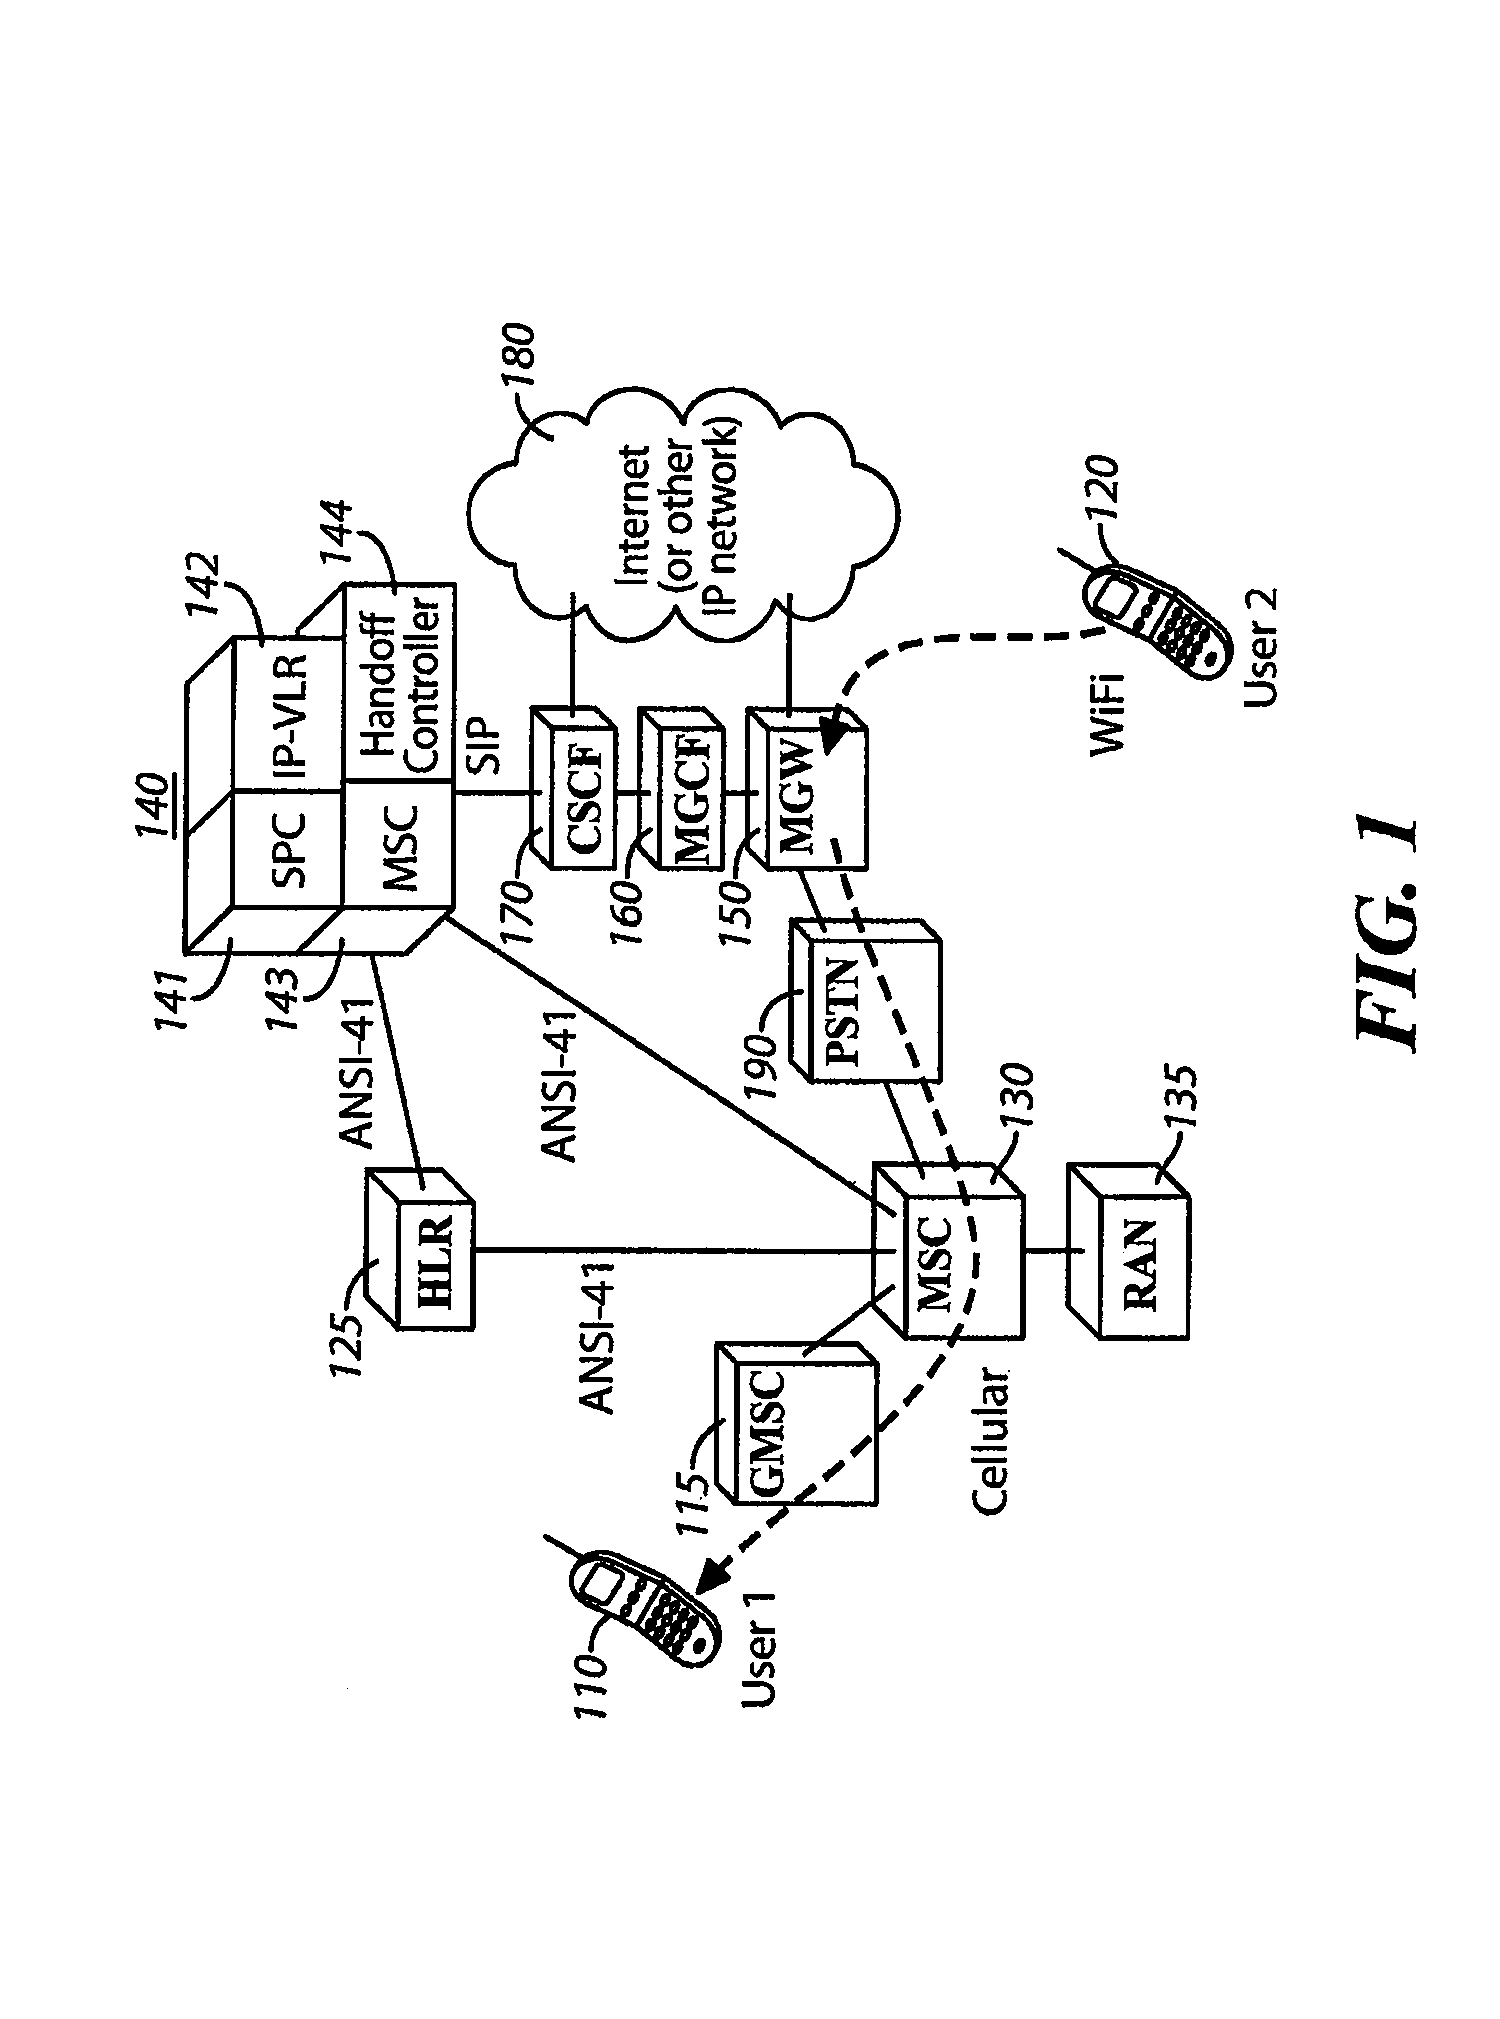 Seamless handoff across heterogeneous access networks using a handoff controller in a service control point